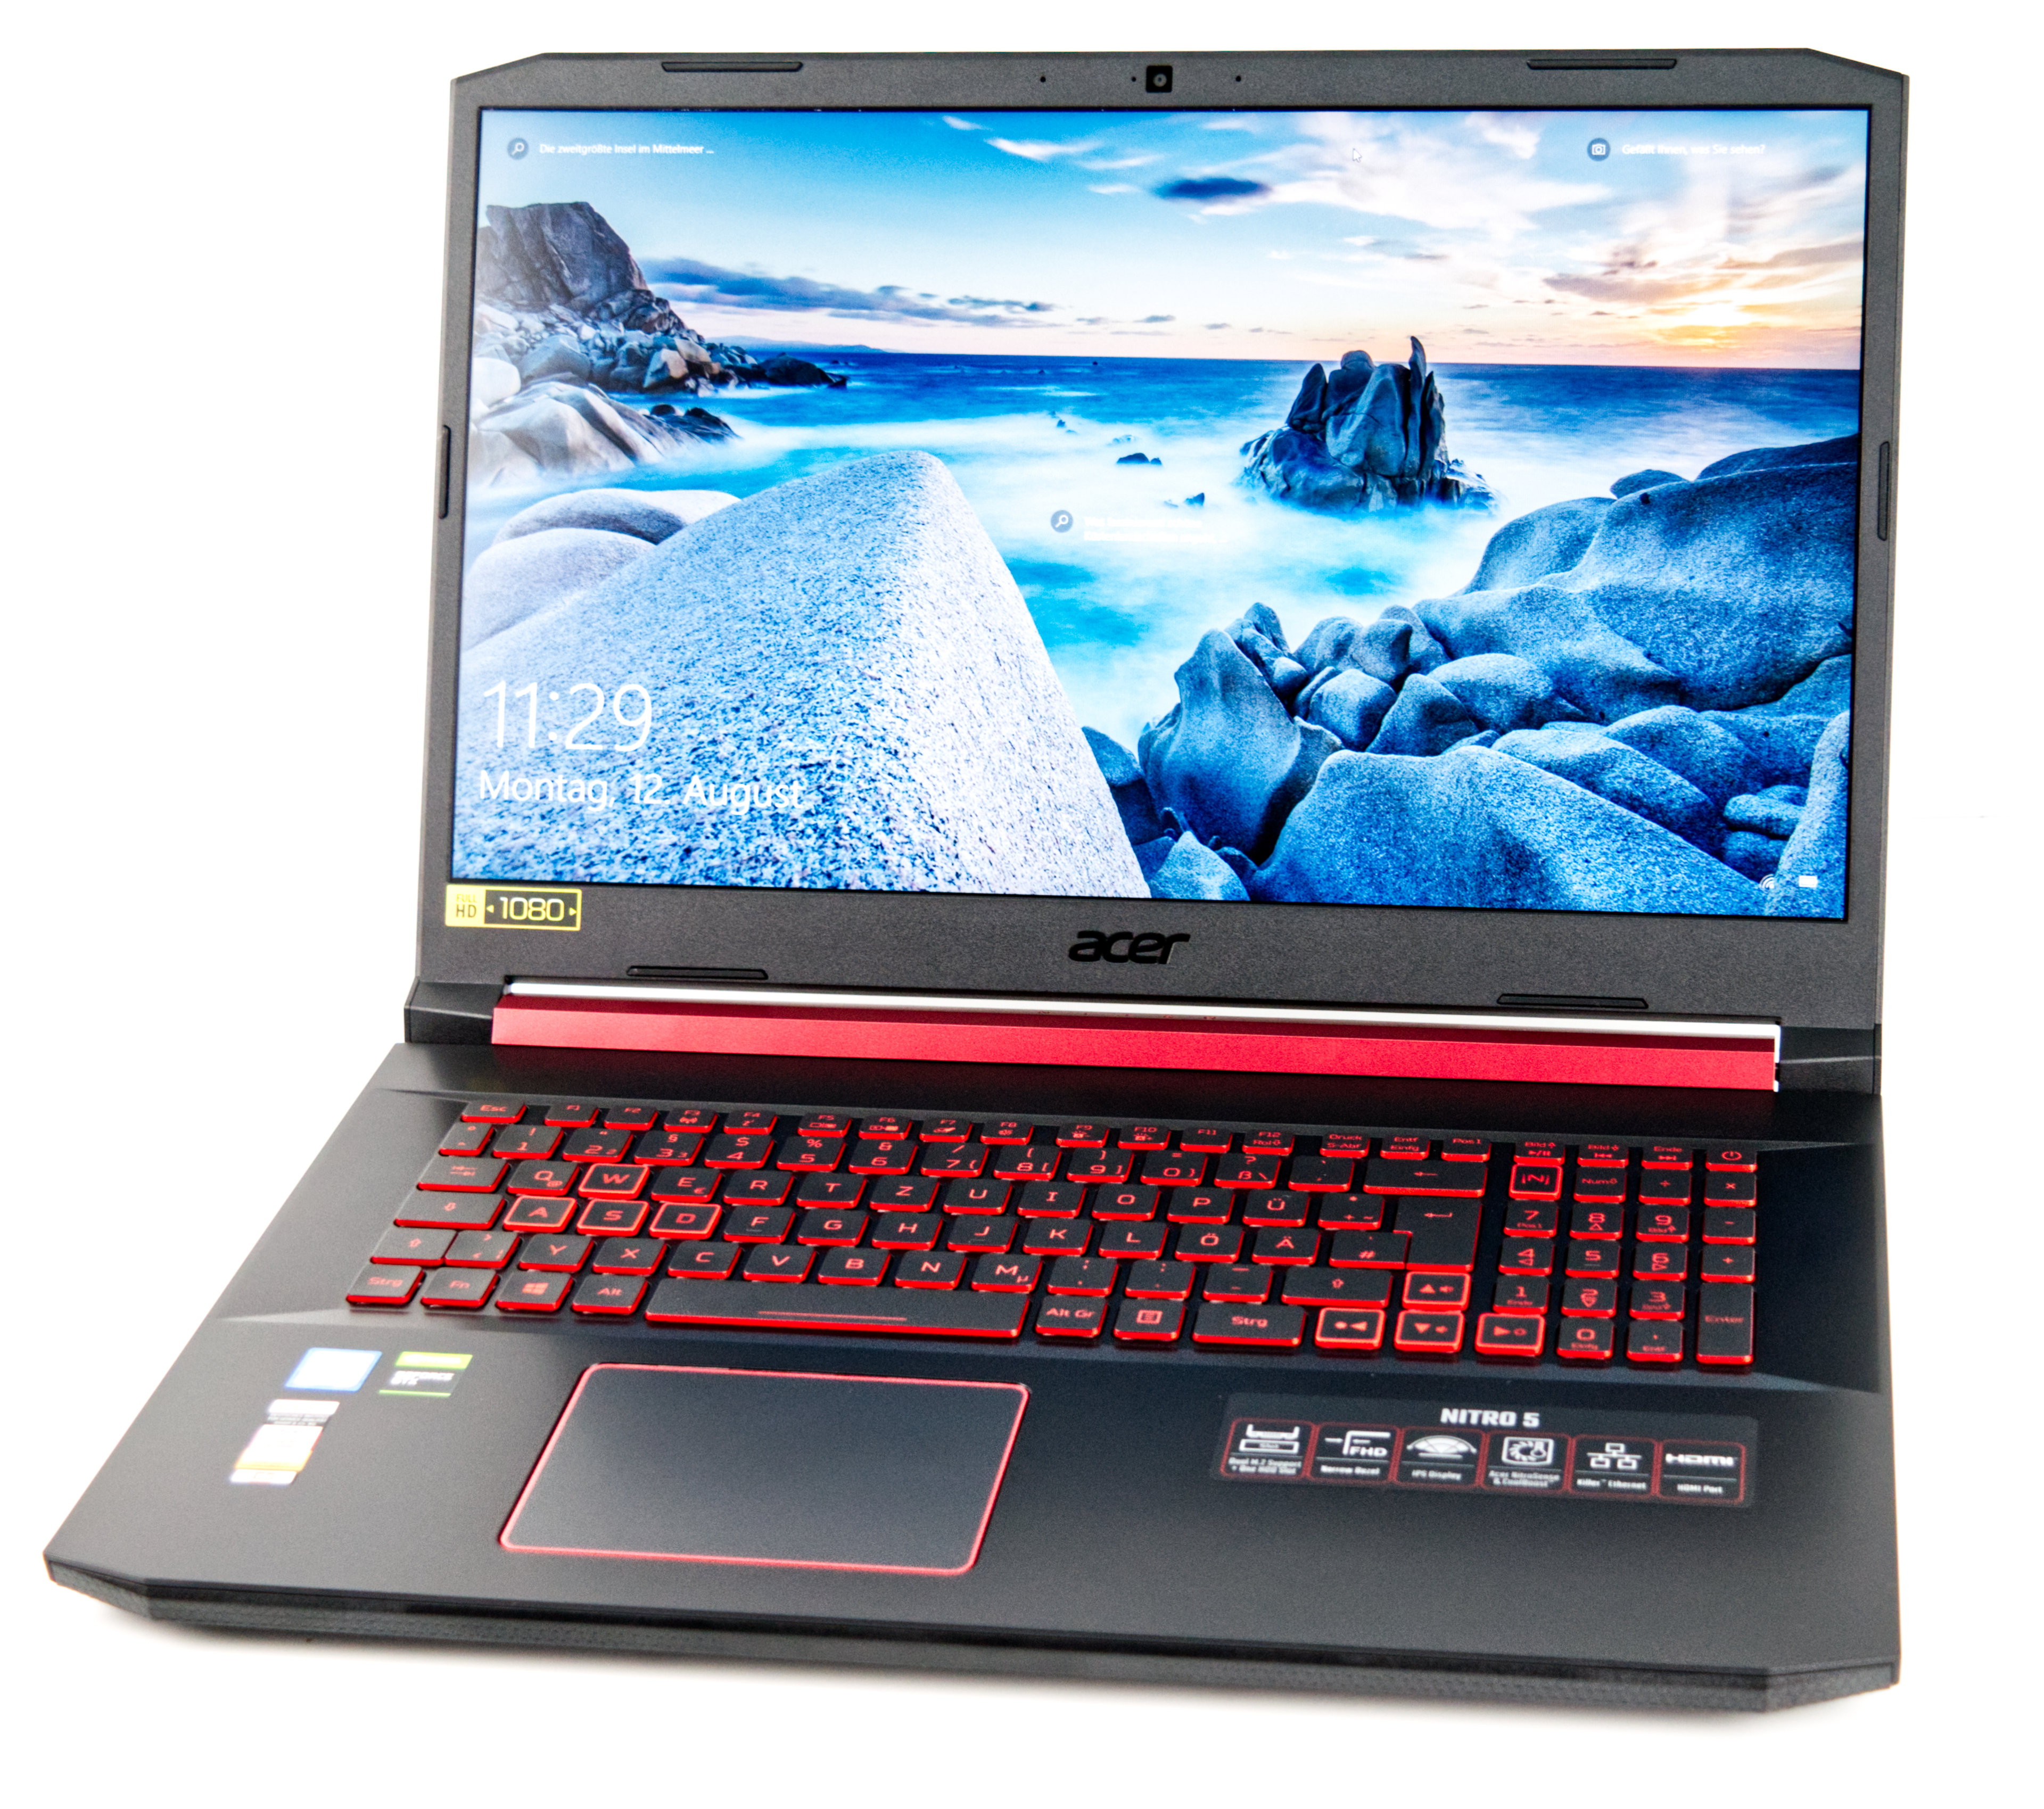 Acer Nitro 5 (2019) review: A great budget-conscious laptop, at